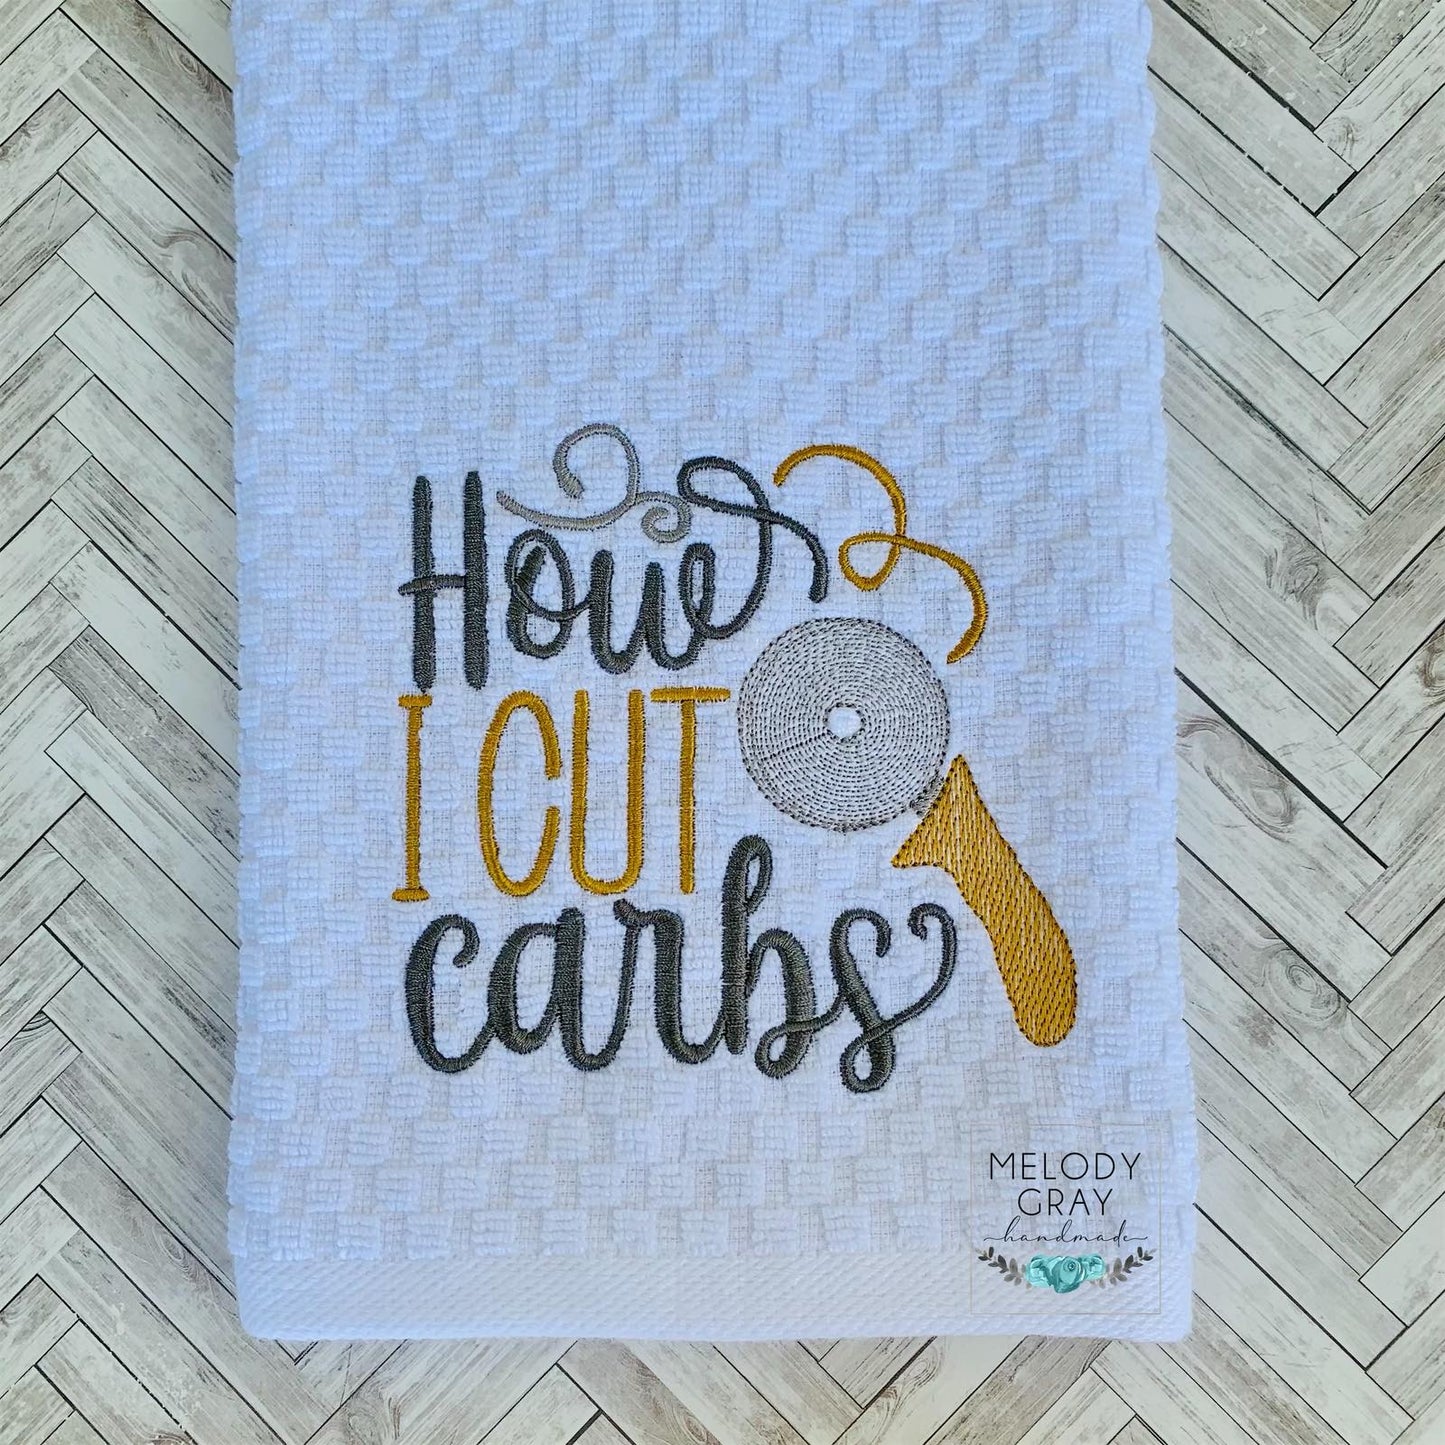 How I Cut Carbs - 3 sizes- Digital Embroidery Design